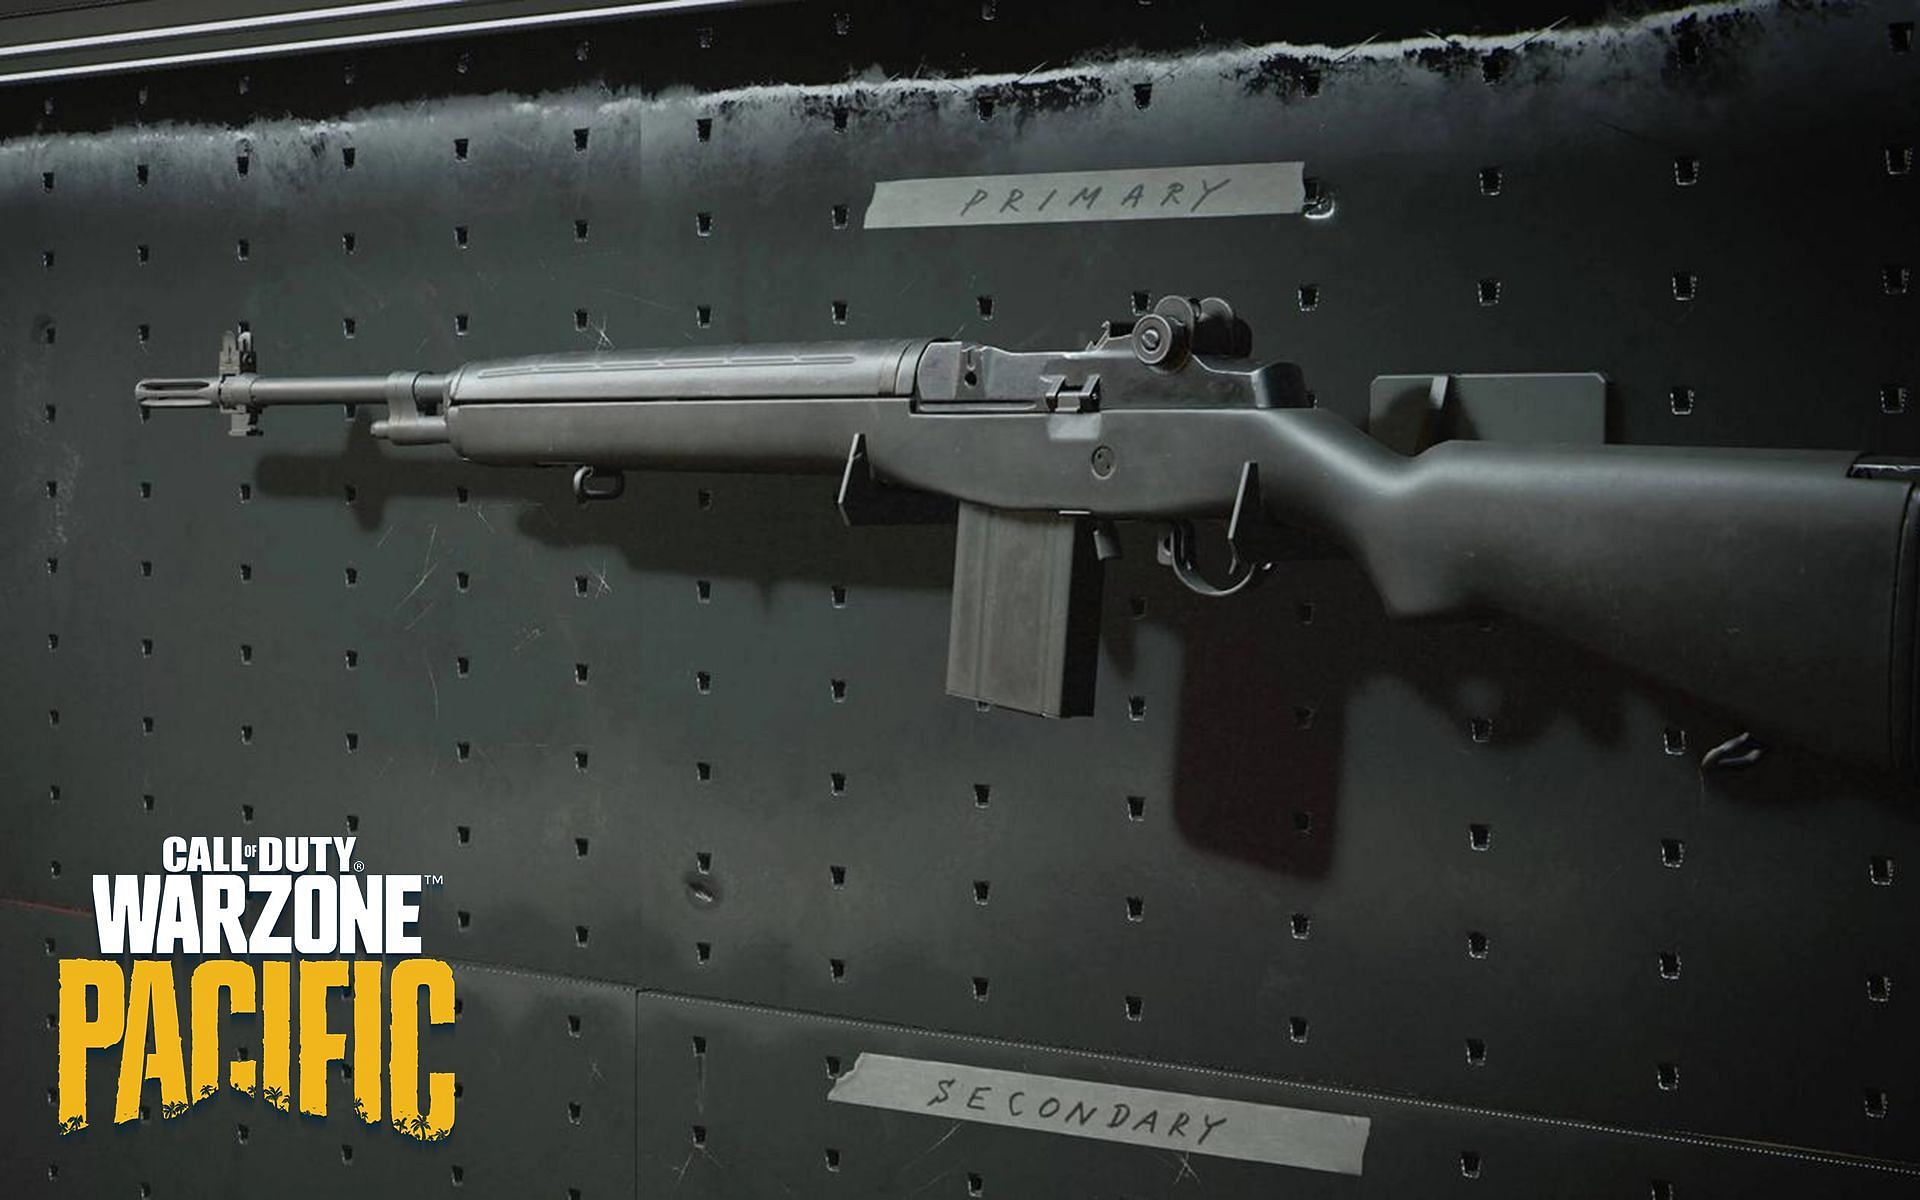 DMR 14 is a semi-auto tactical rifle in Call of Duty: Warzone (Image via Activision)